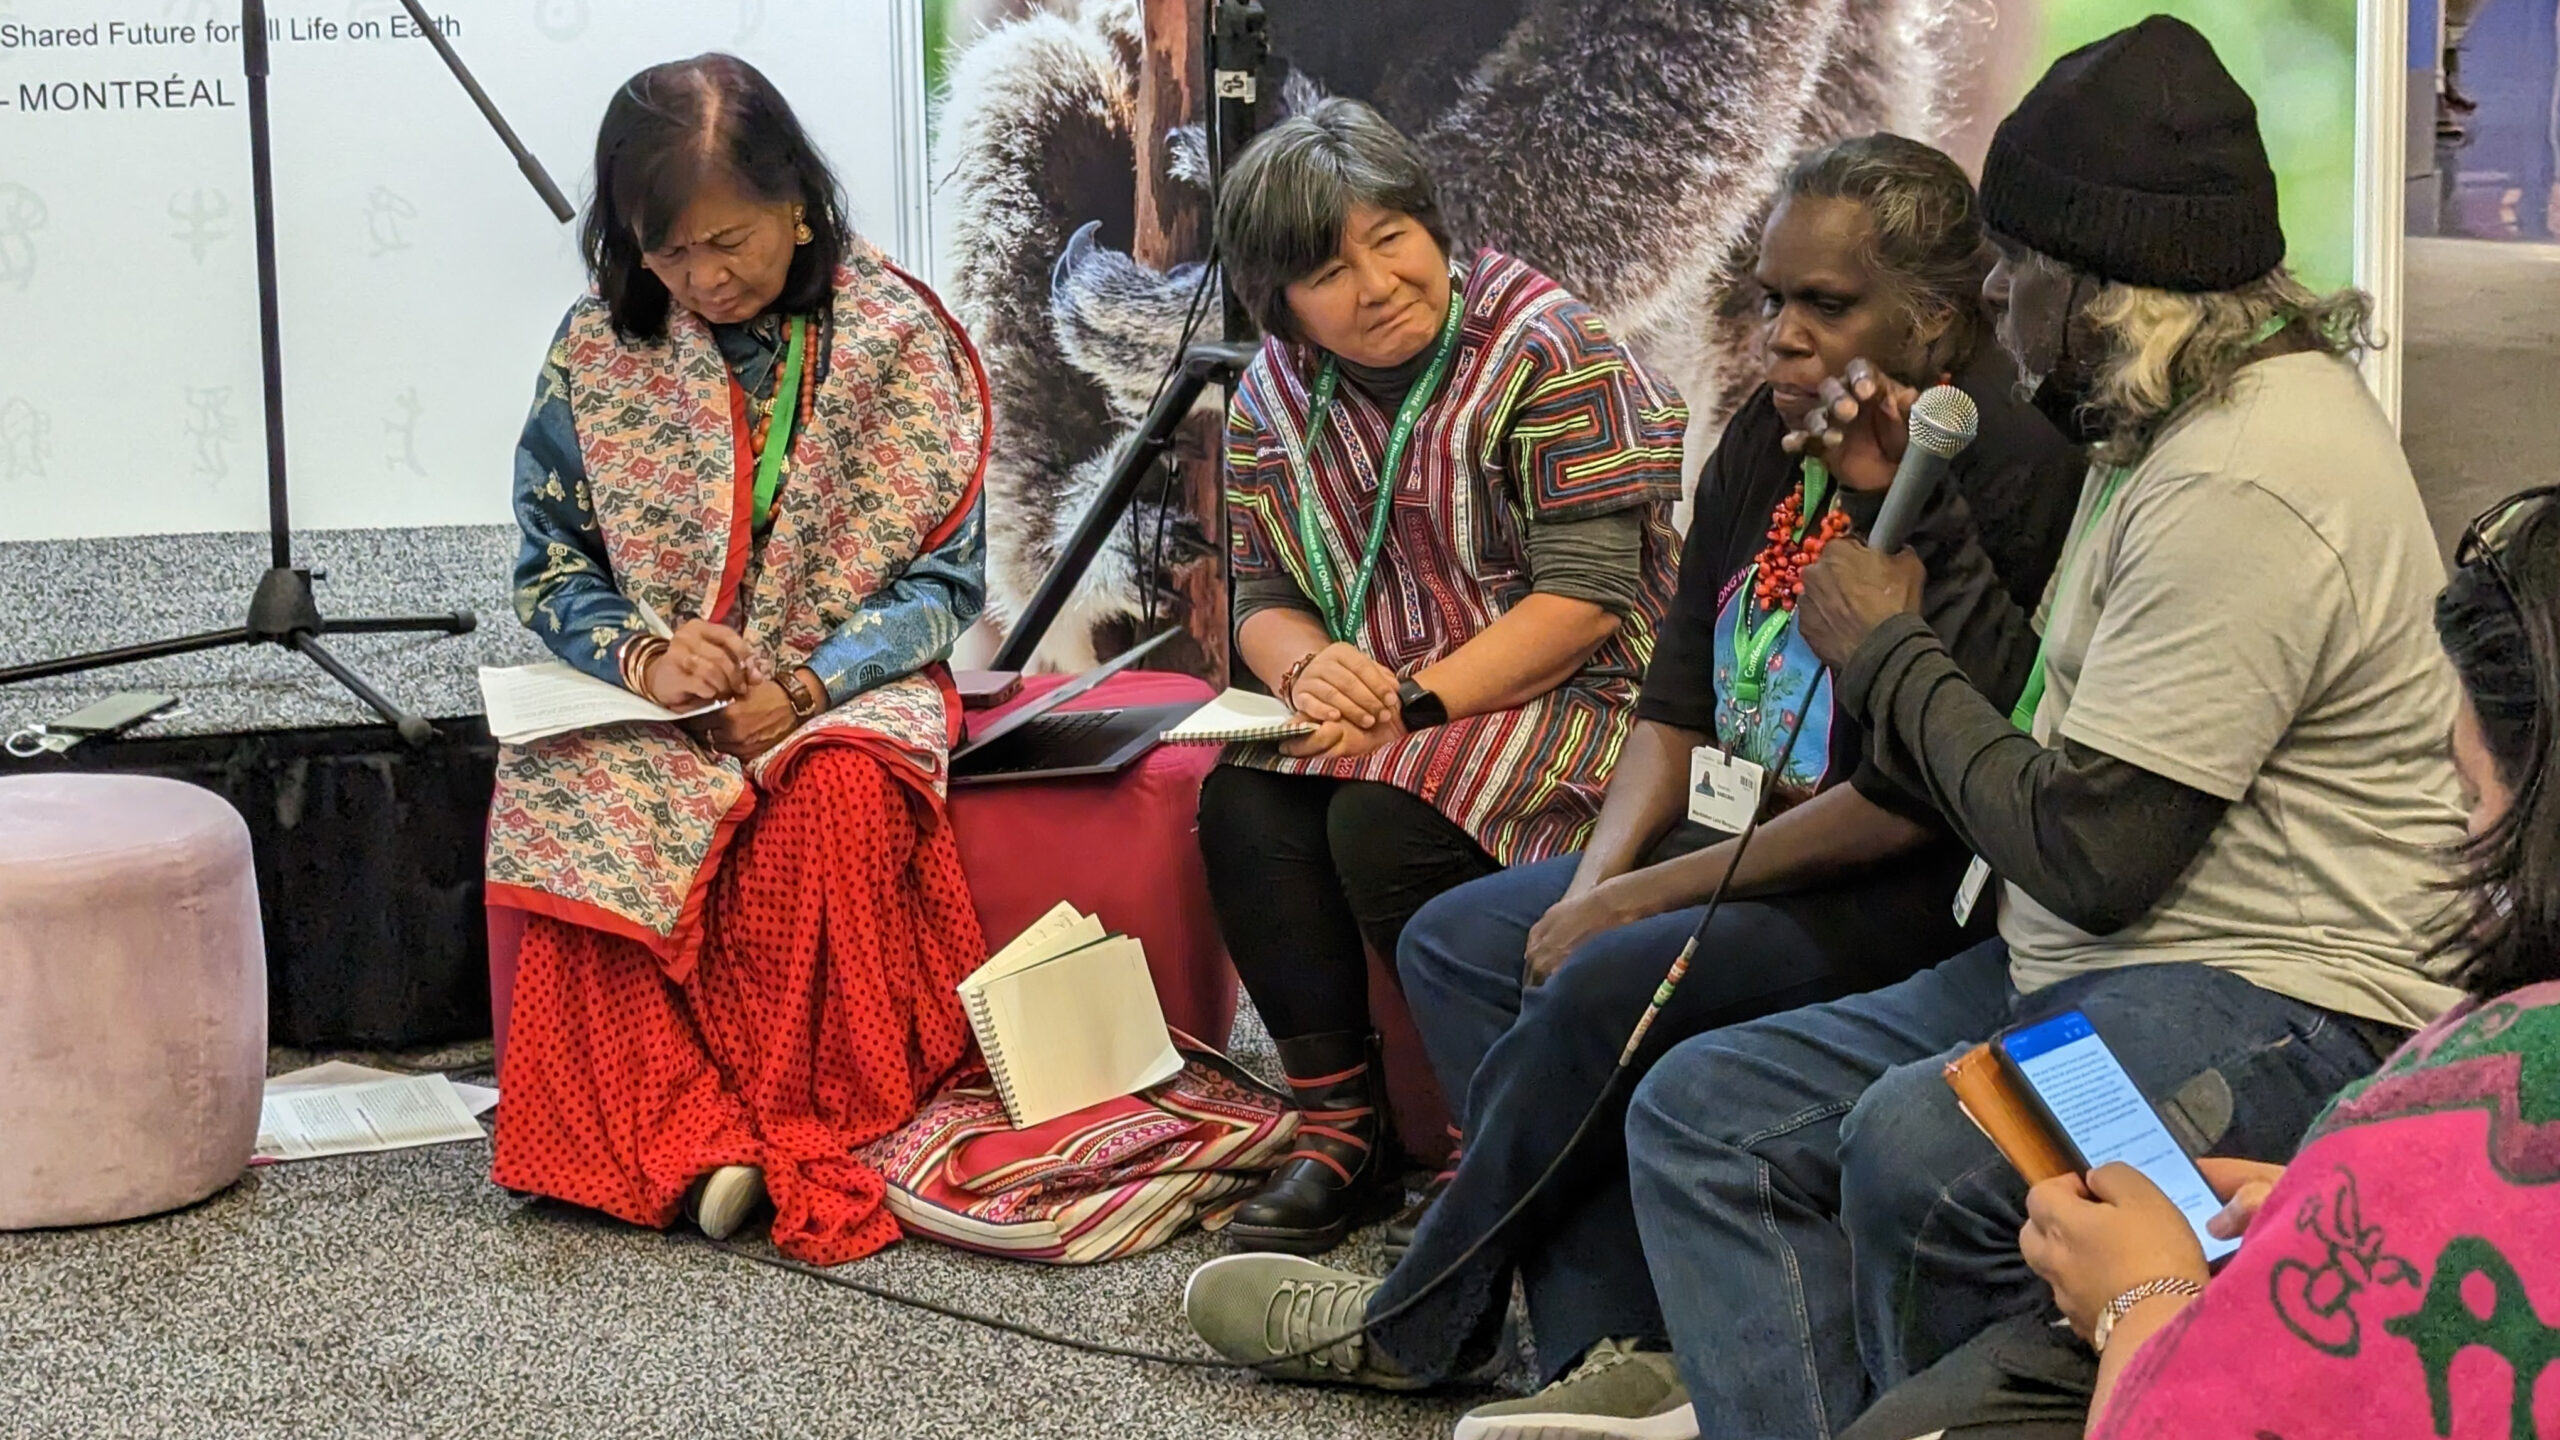 Rosemary Nabulwad and Conrad Maralngurra (Warkkeden Land Management, Australia) introduce the Warddeken Indigenous Protected Area during the 15th Conference of Parties to the UN Convention on Biological Diversity in Montreal. Photo: David Rotschild.